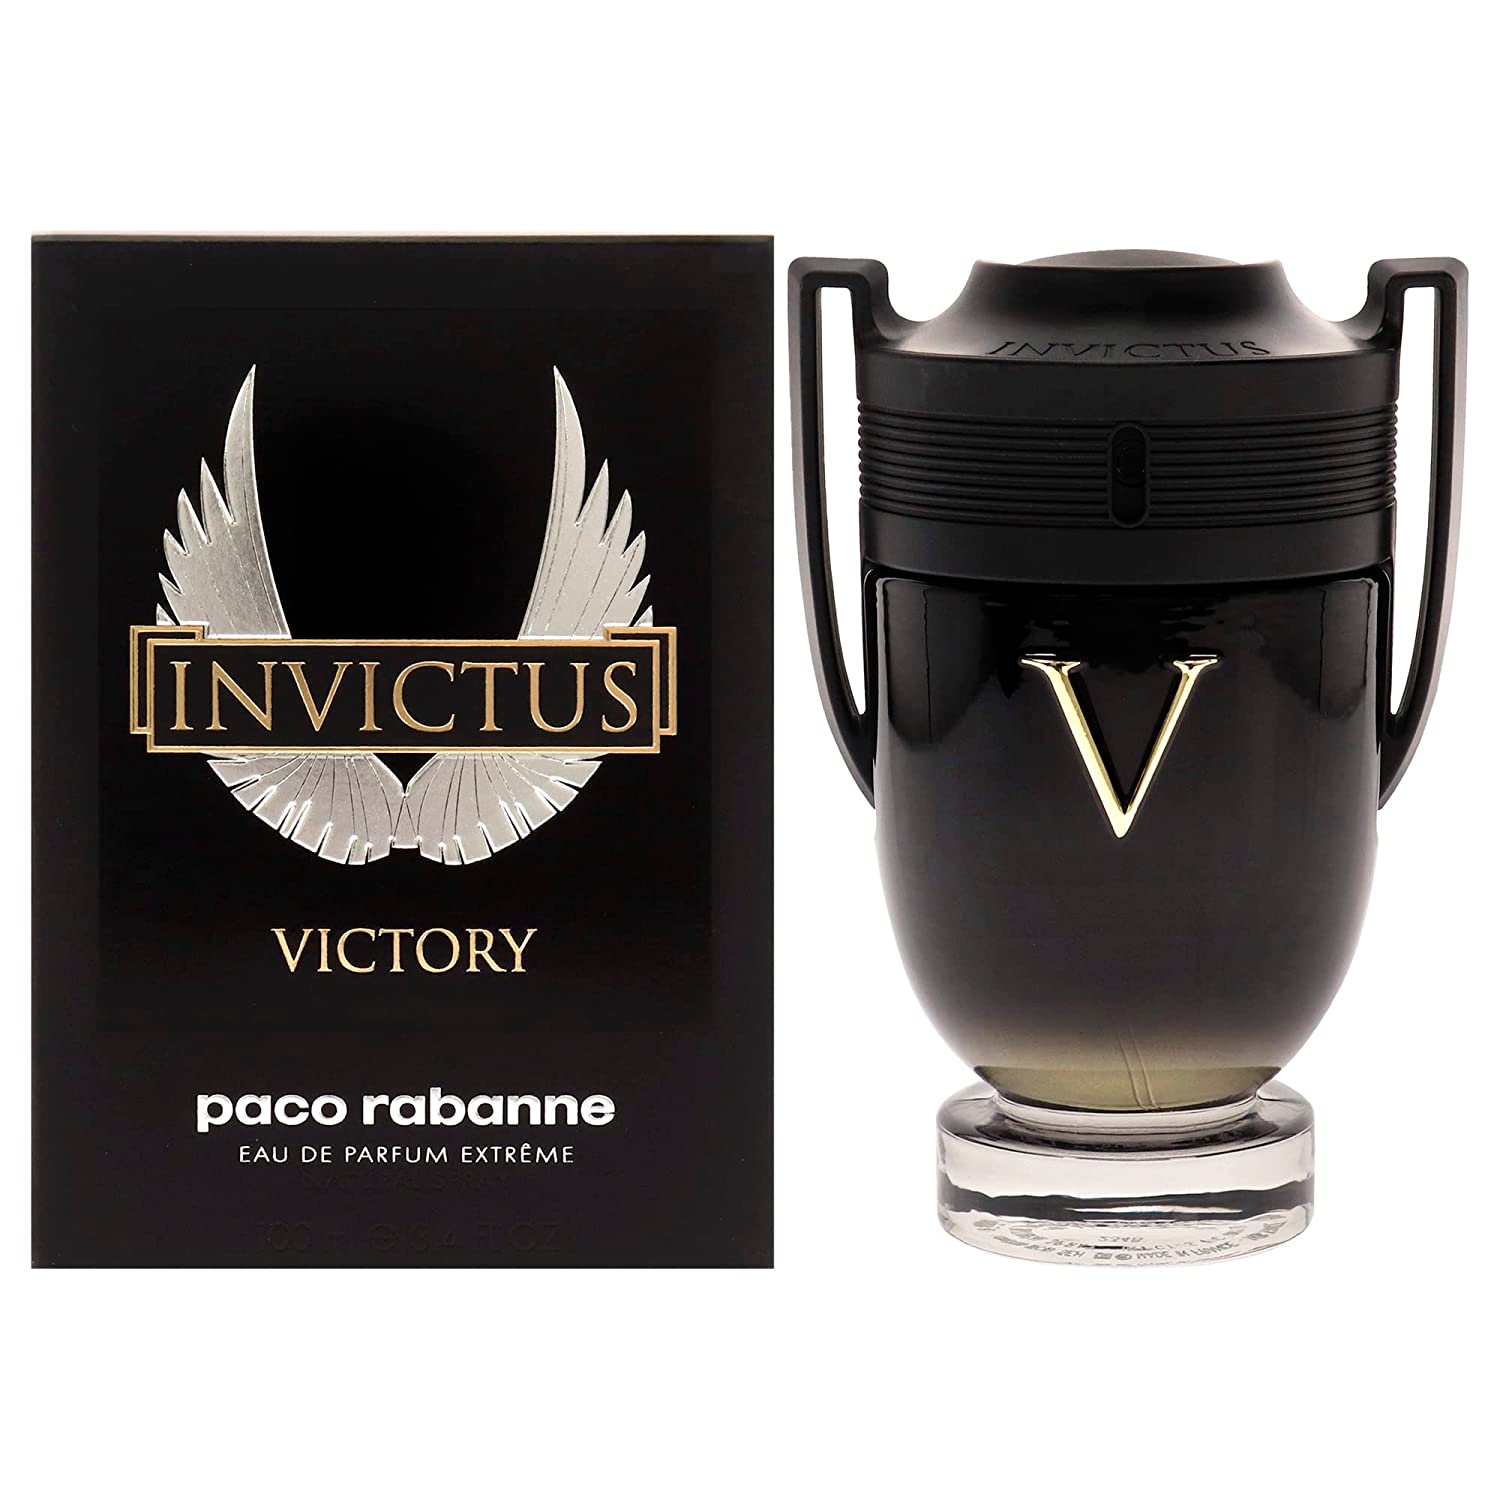 Invictus Victory by Paco Rabanne 3.4 oz EDP Extreme Spray for Men